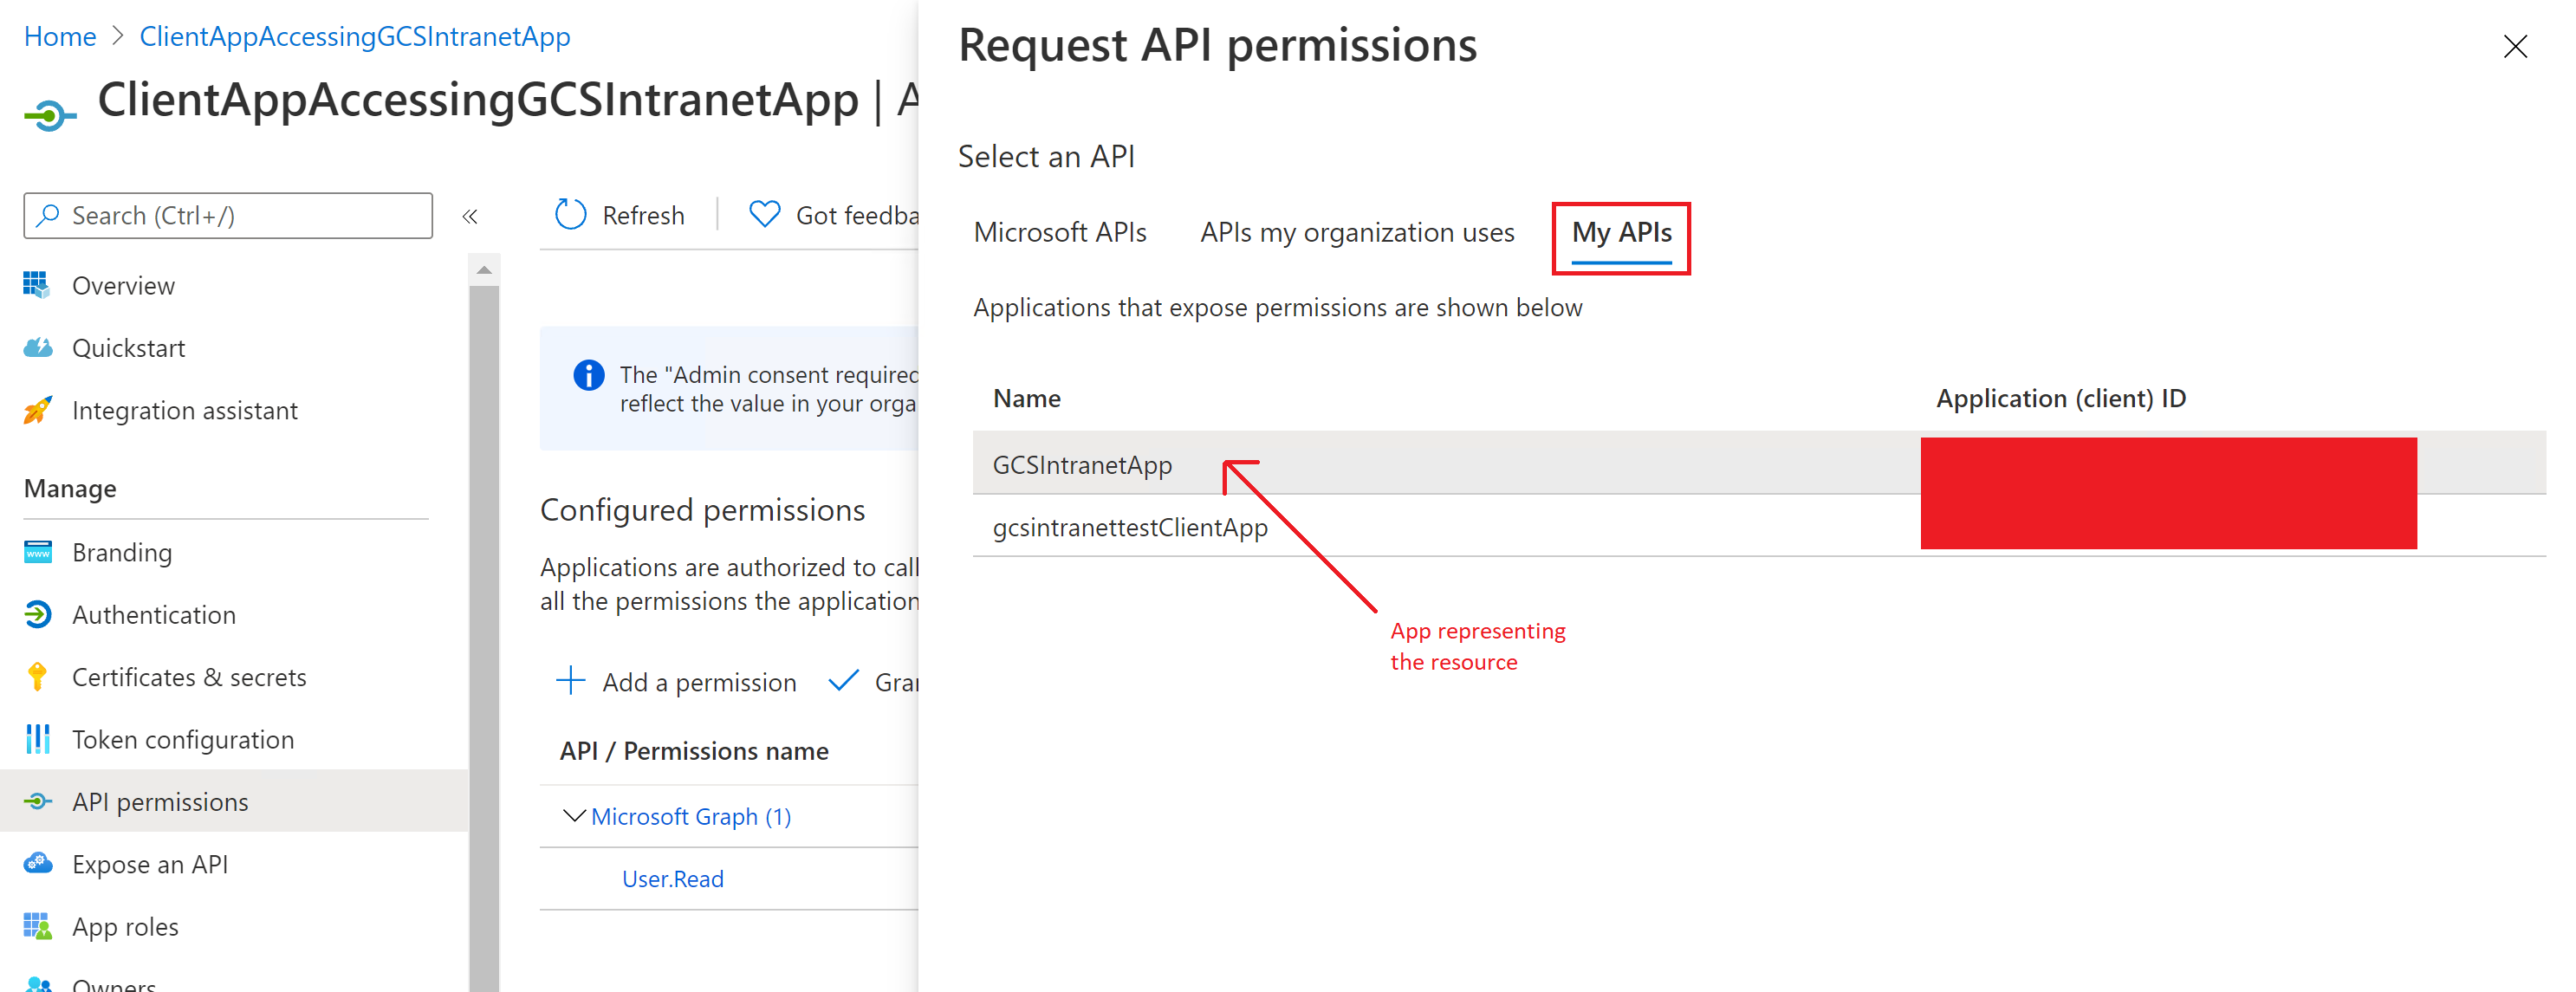 Image showing the section to select an API.